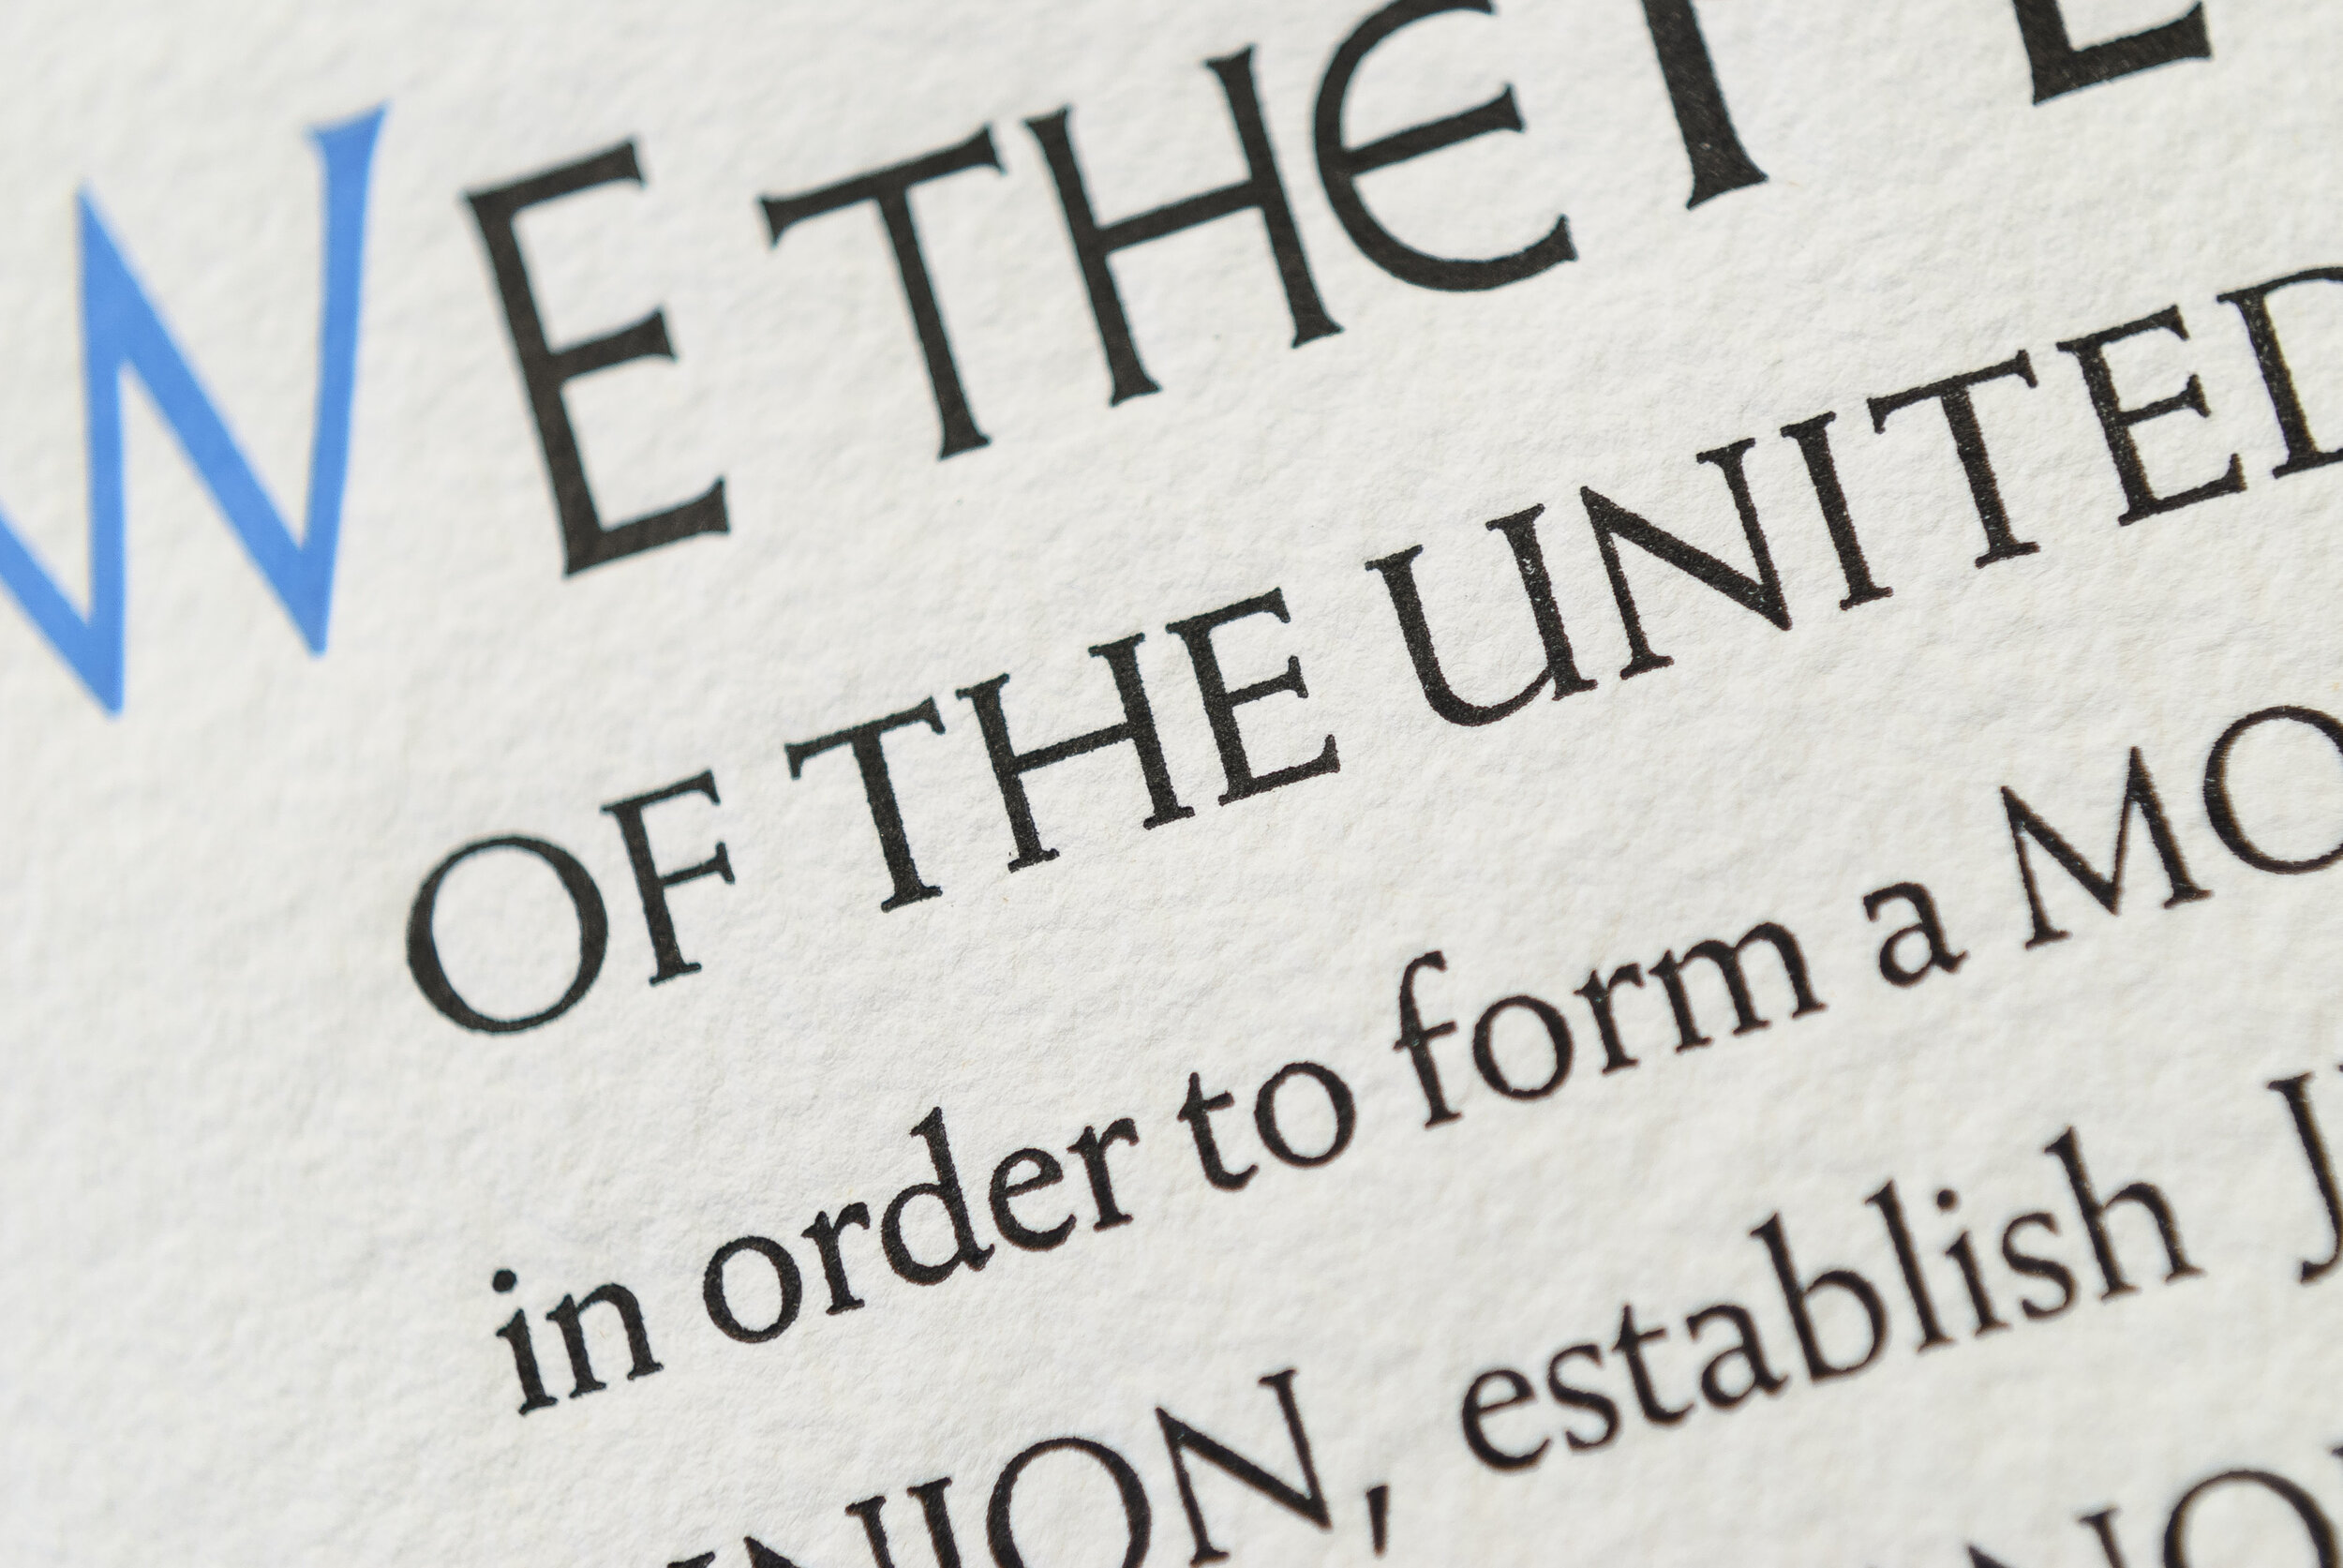 The Preamble to the U.S. Constitution